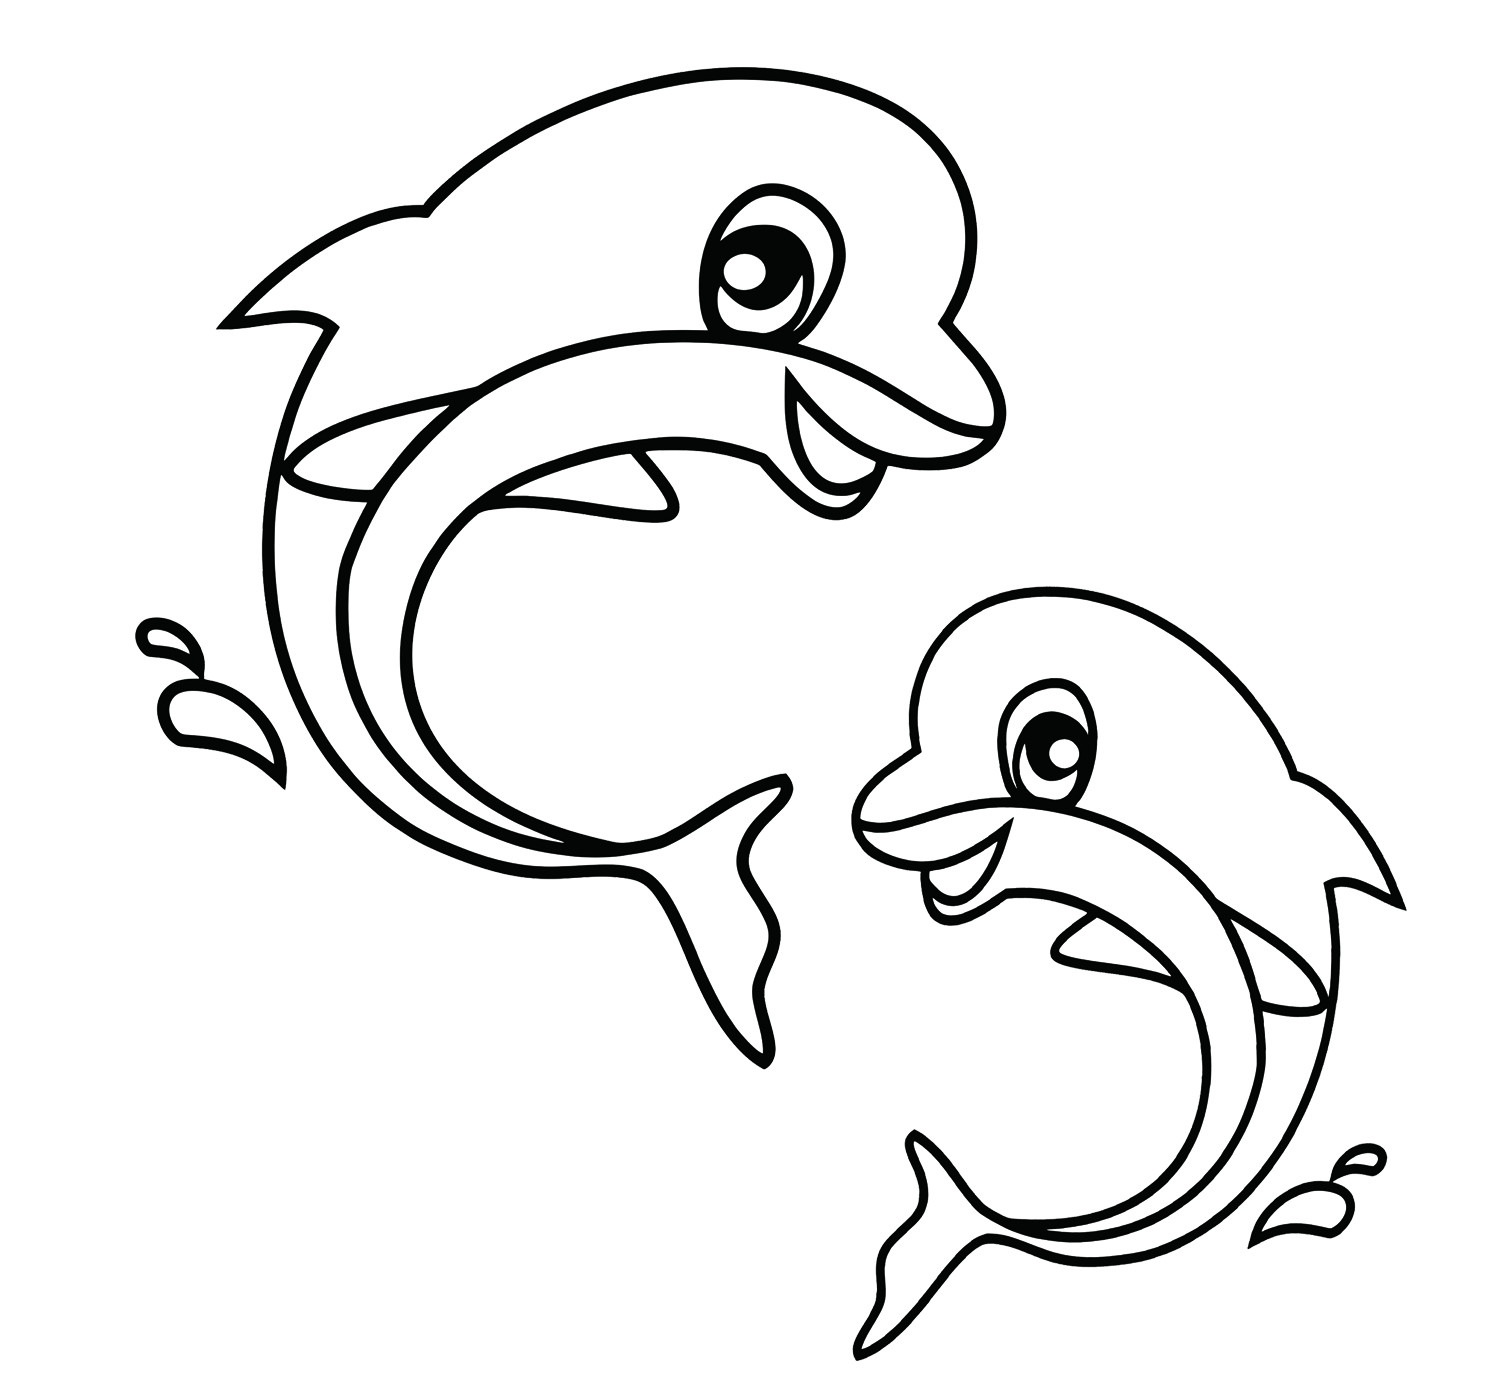 Cool Animal Coloring Pages
 Coloring Animals Cool Coloring Ideas Coloring